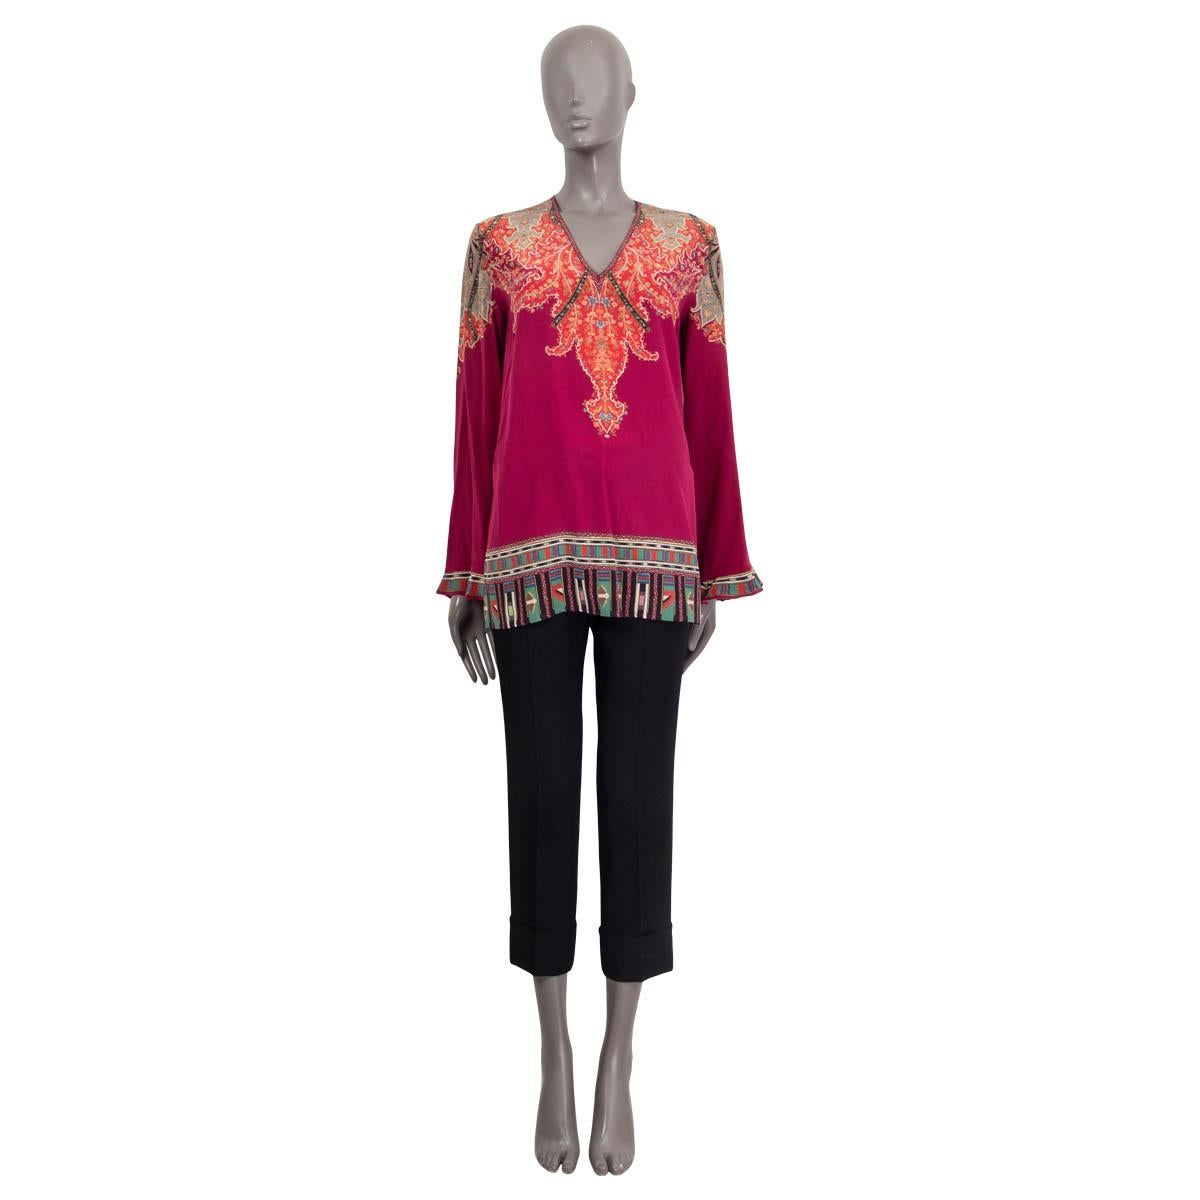 100% authentic Etro long sleeve tunic blouse in burgundy, red, black and pale sage silk (100%). Features a v-neck, a paisley print and slits on the side. Unlined. Has a barely visible stain at the armpit otherwise in excellent